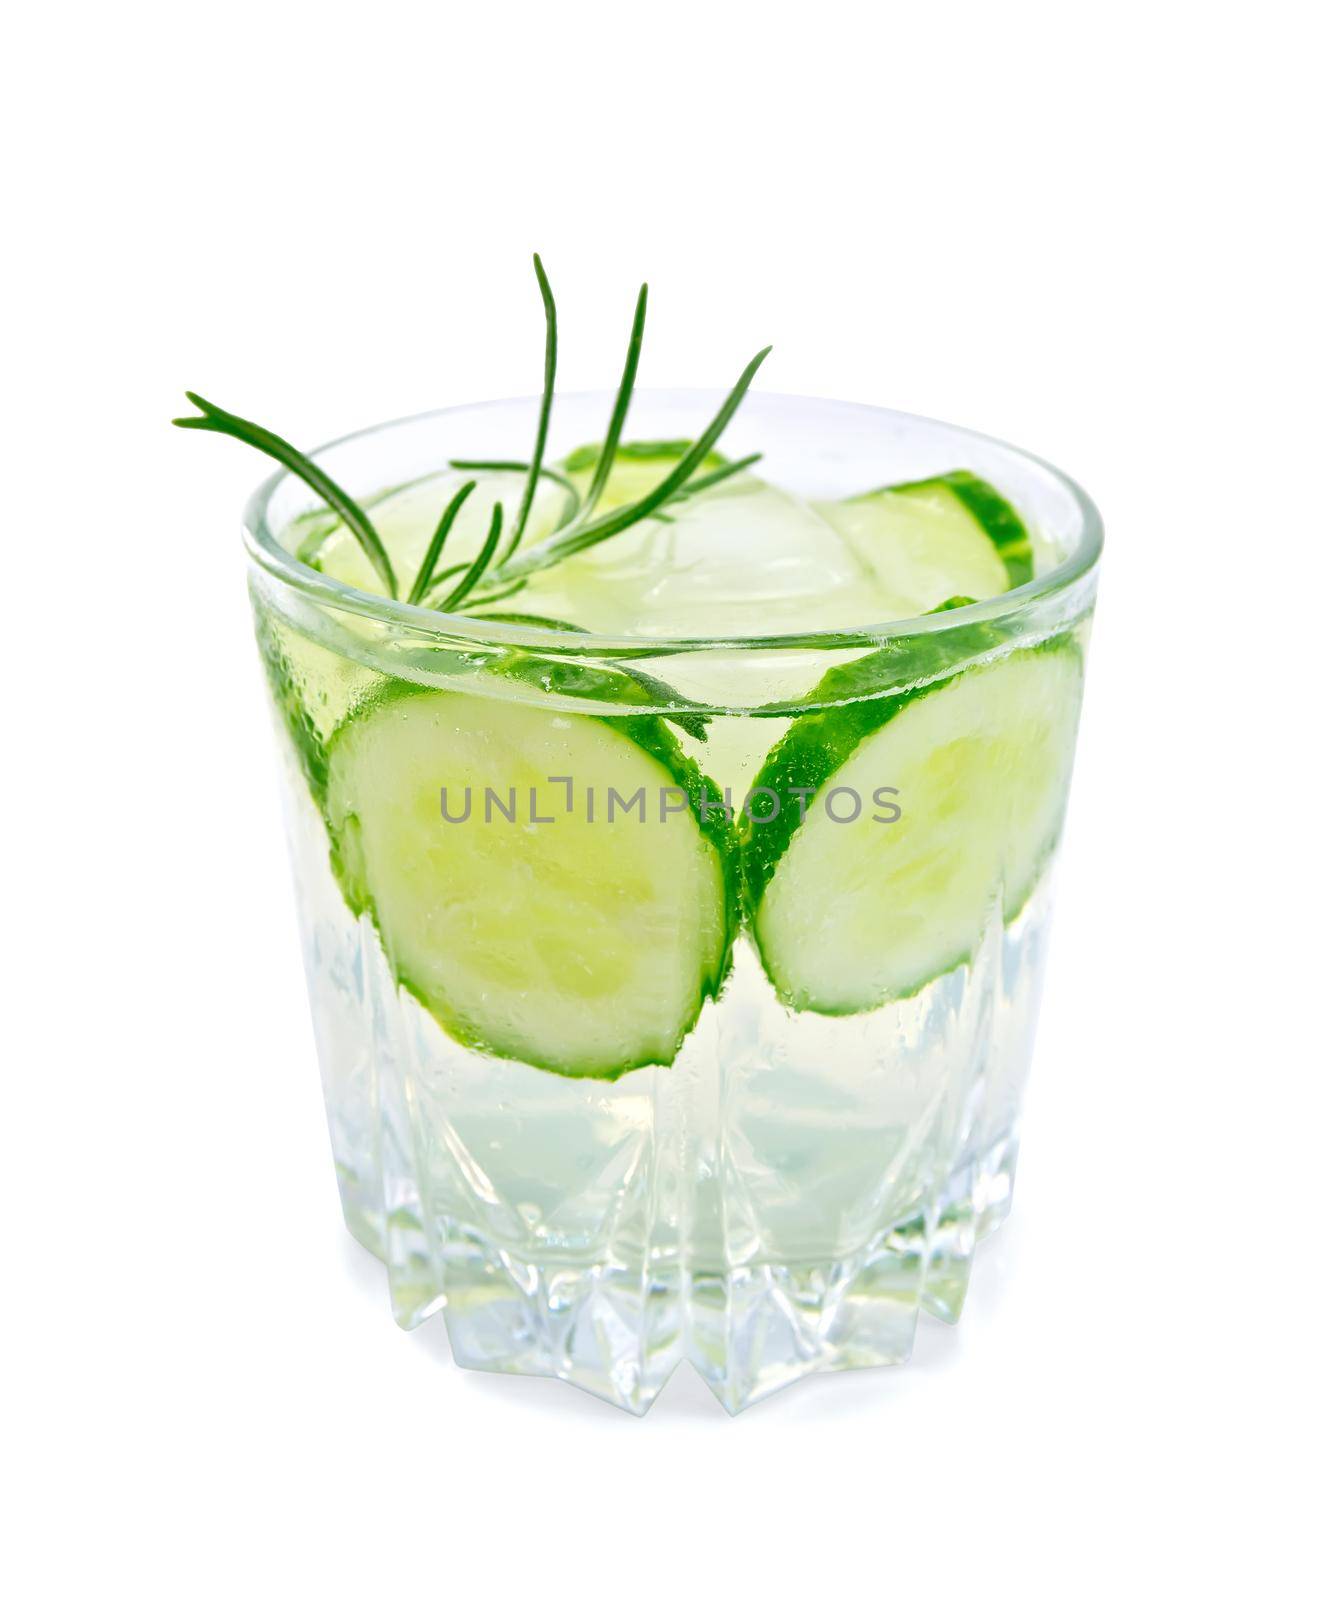 Lemonade with fresh cucumber and rosemary in glassful isolated on white background